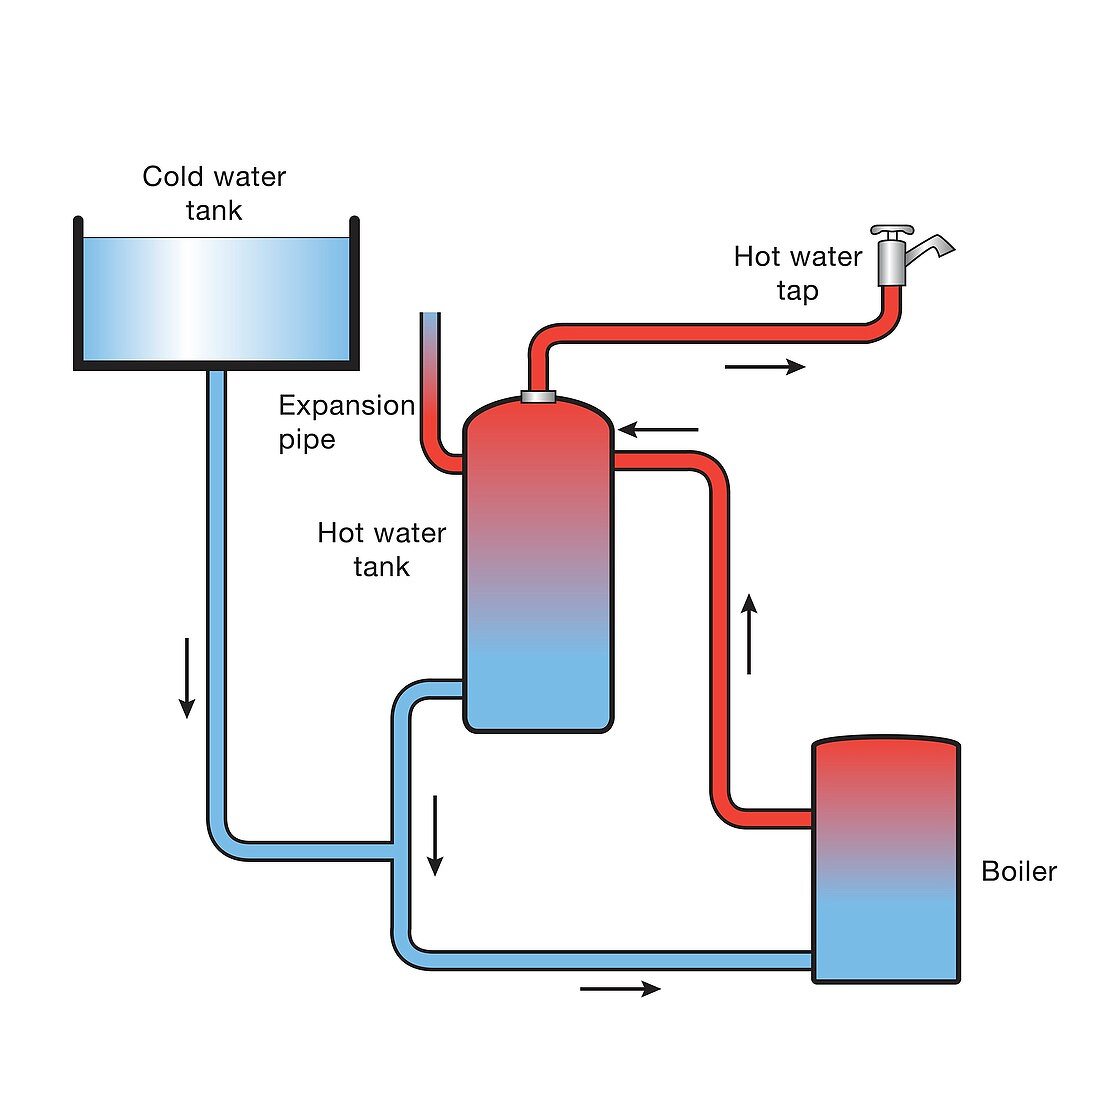 Water heating system, illustration